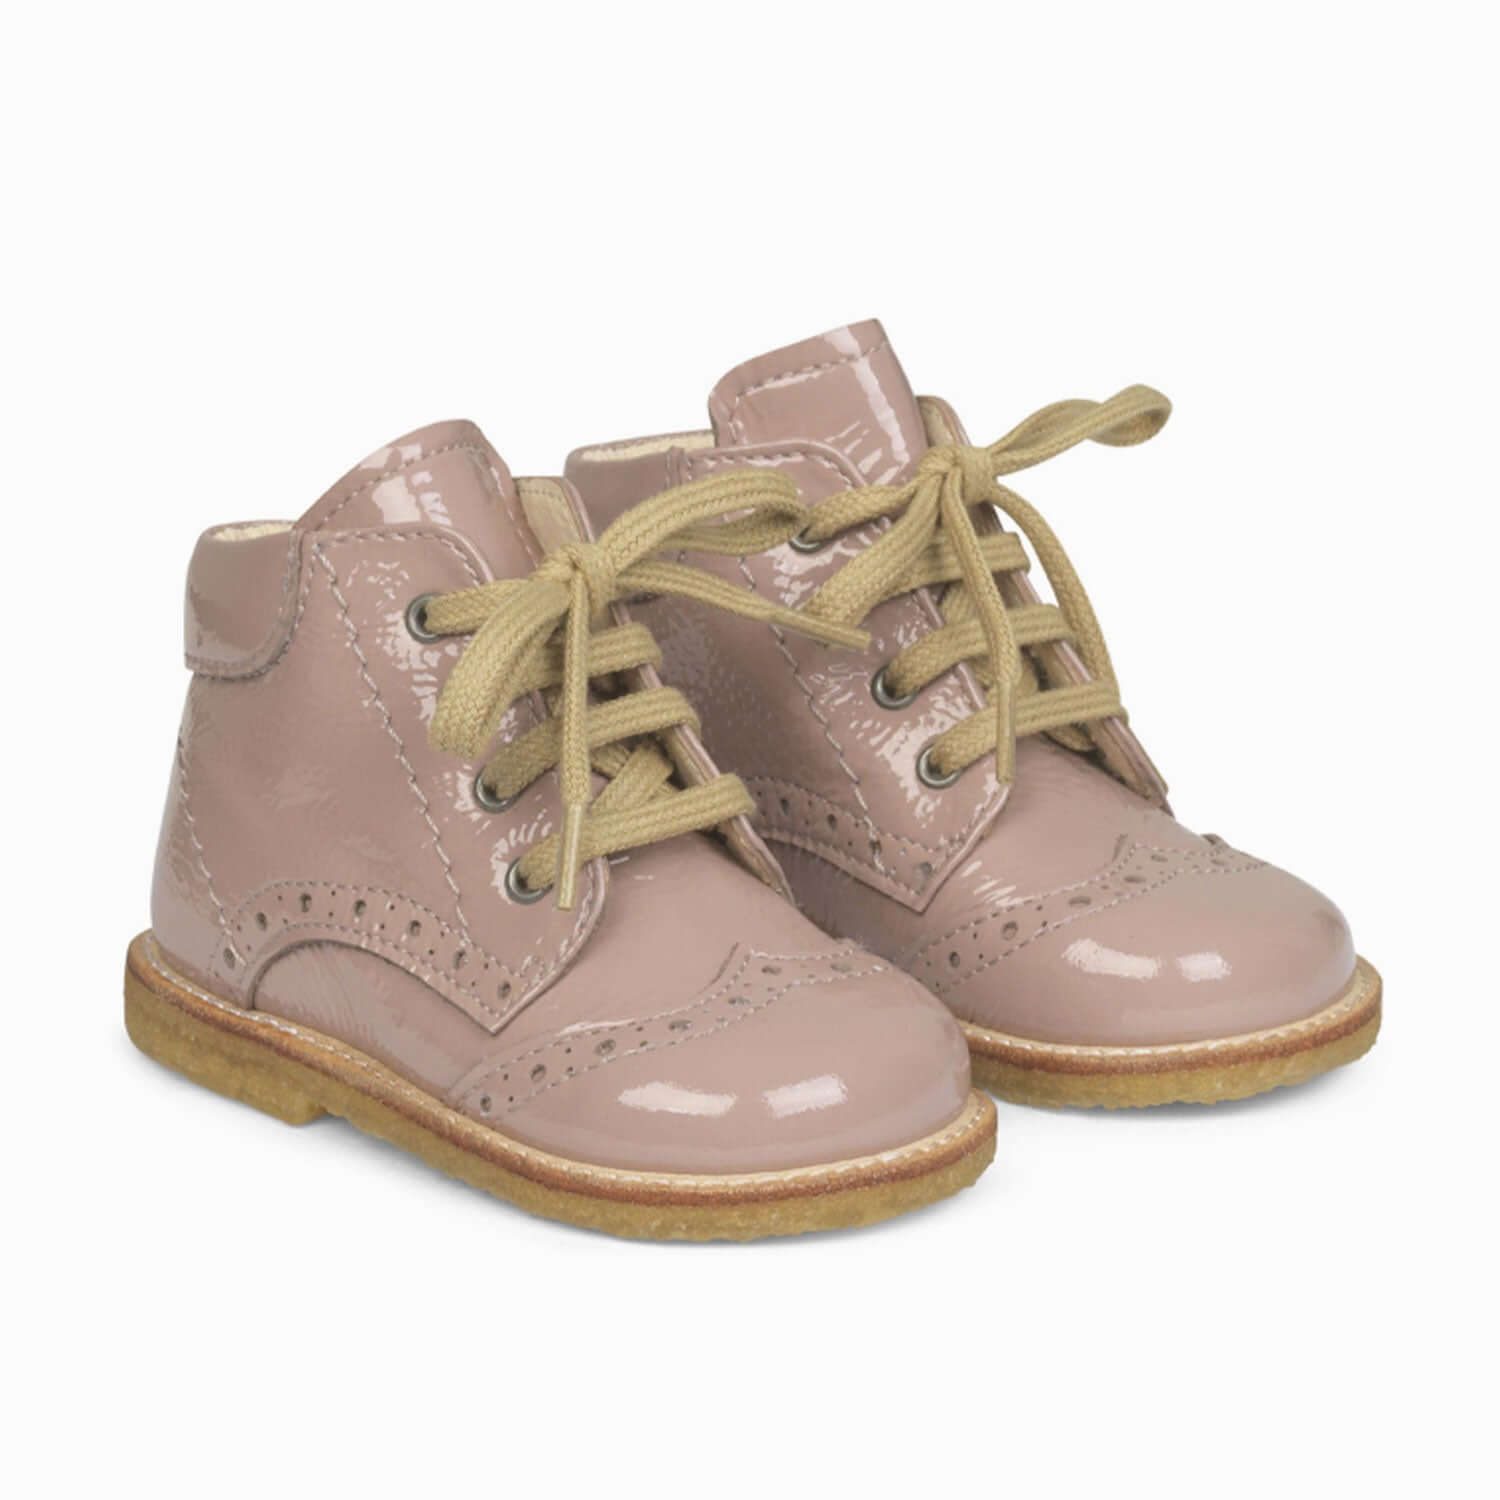 An image of Kids Boots - Toddler Boots - Kids Winter Boots With Laces - Rose | Angulus EU27/...